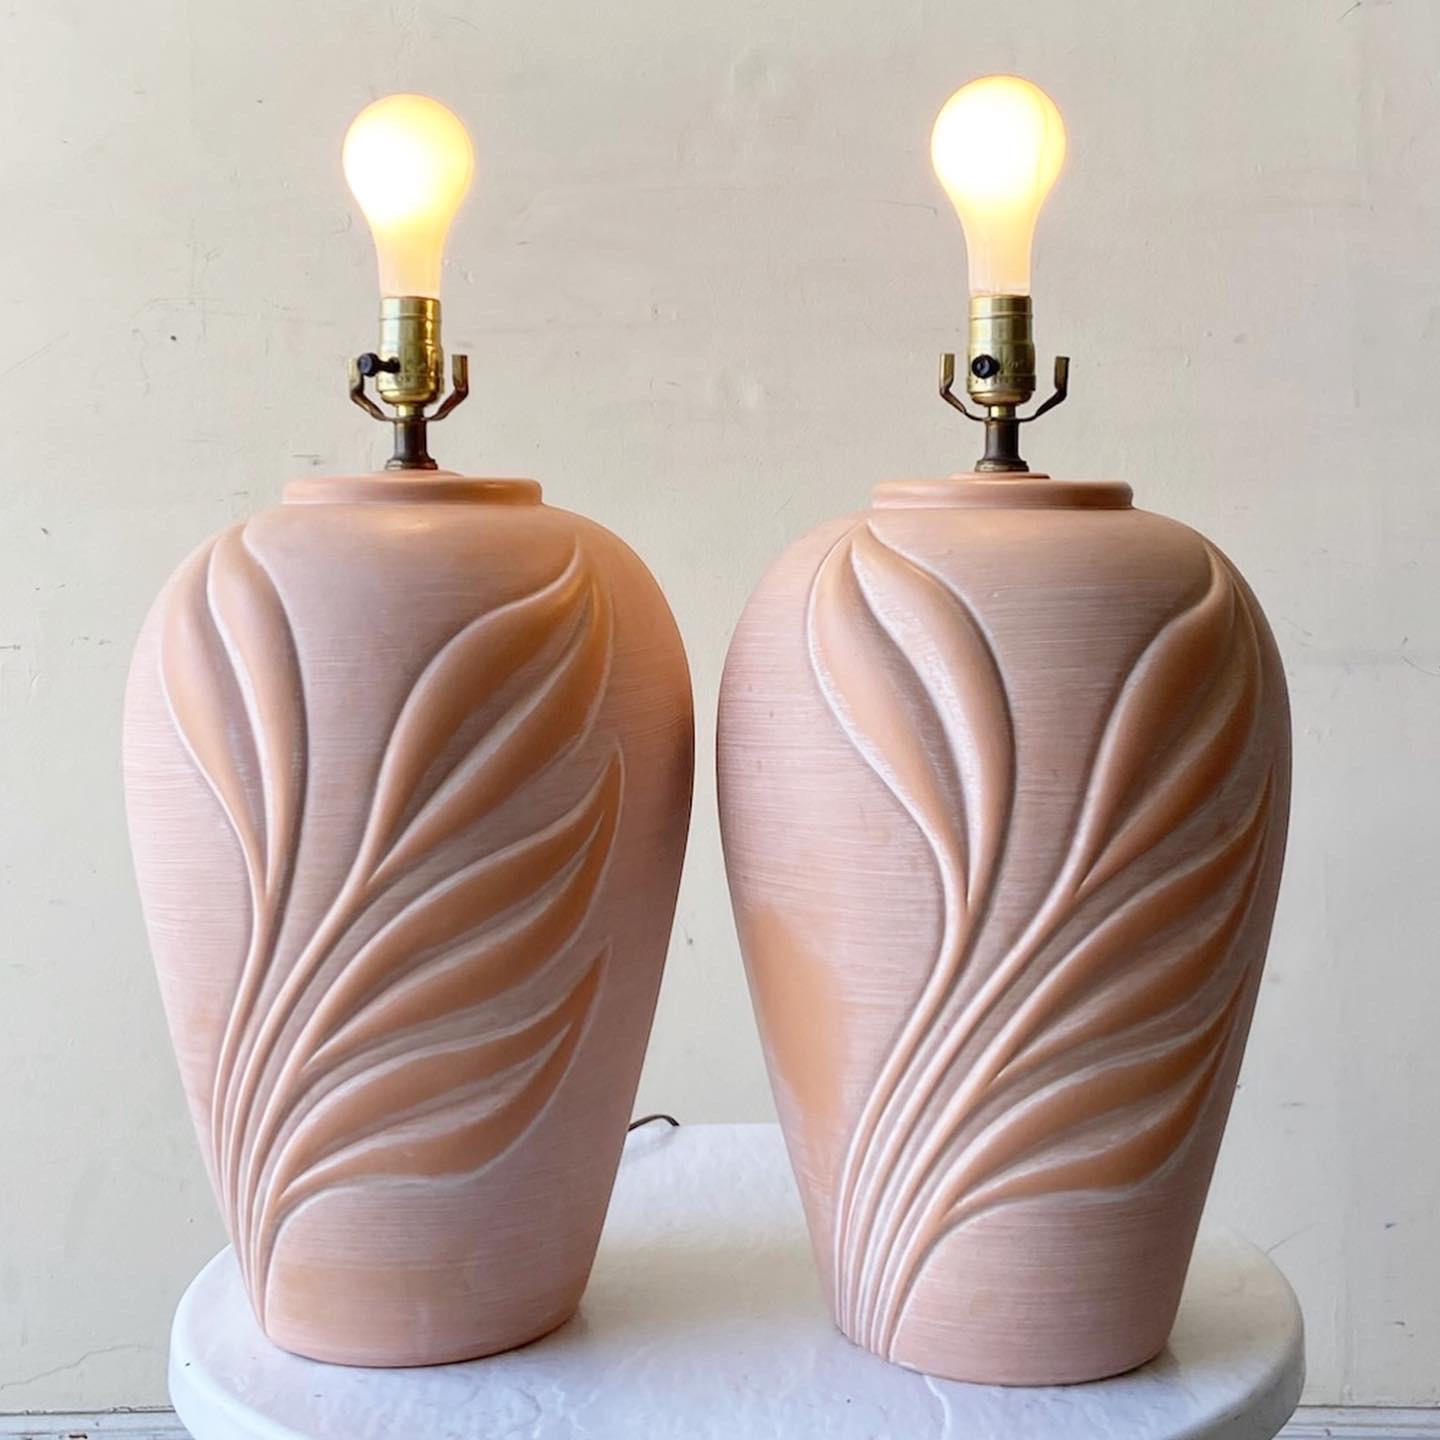 Awesome pair of postmodern ceramic table lamps by Harris Lamps. Each lamp displays a pink embossed bouquet.
   